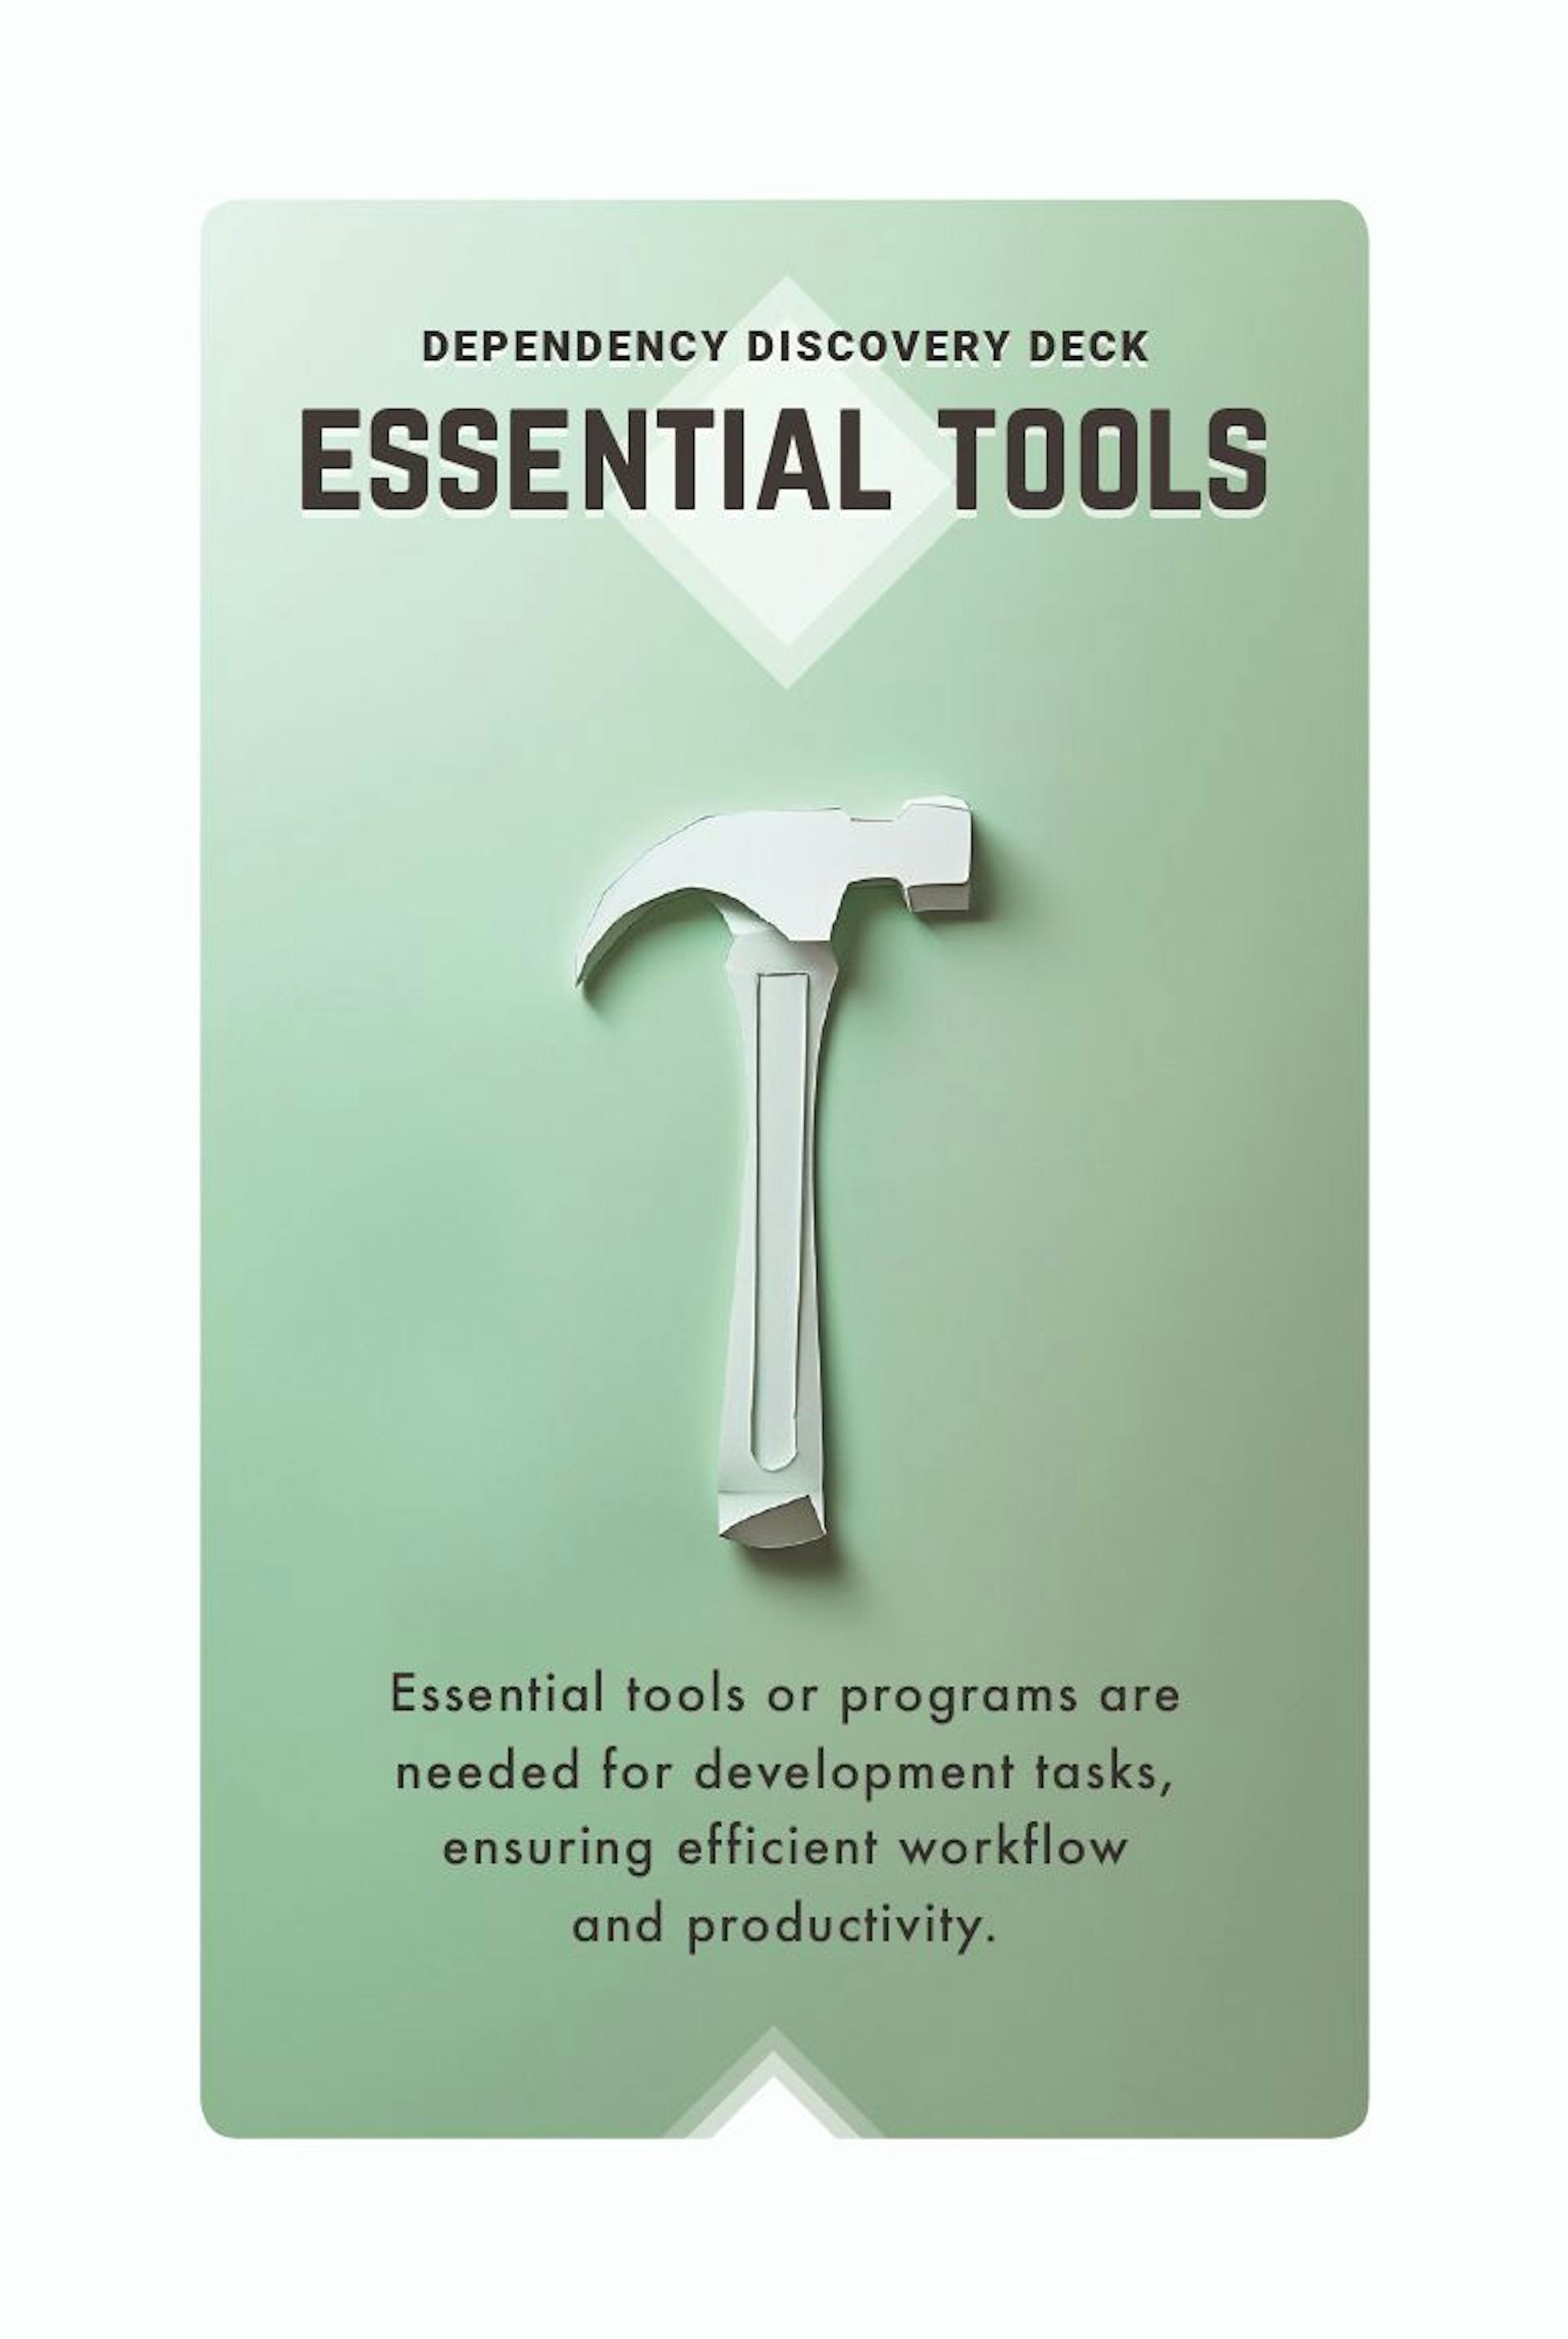 Card for missing External Tools